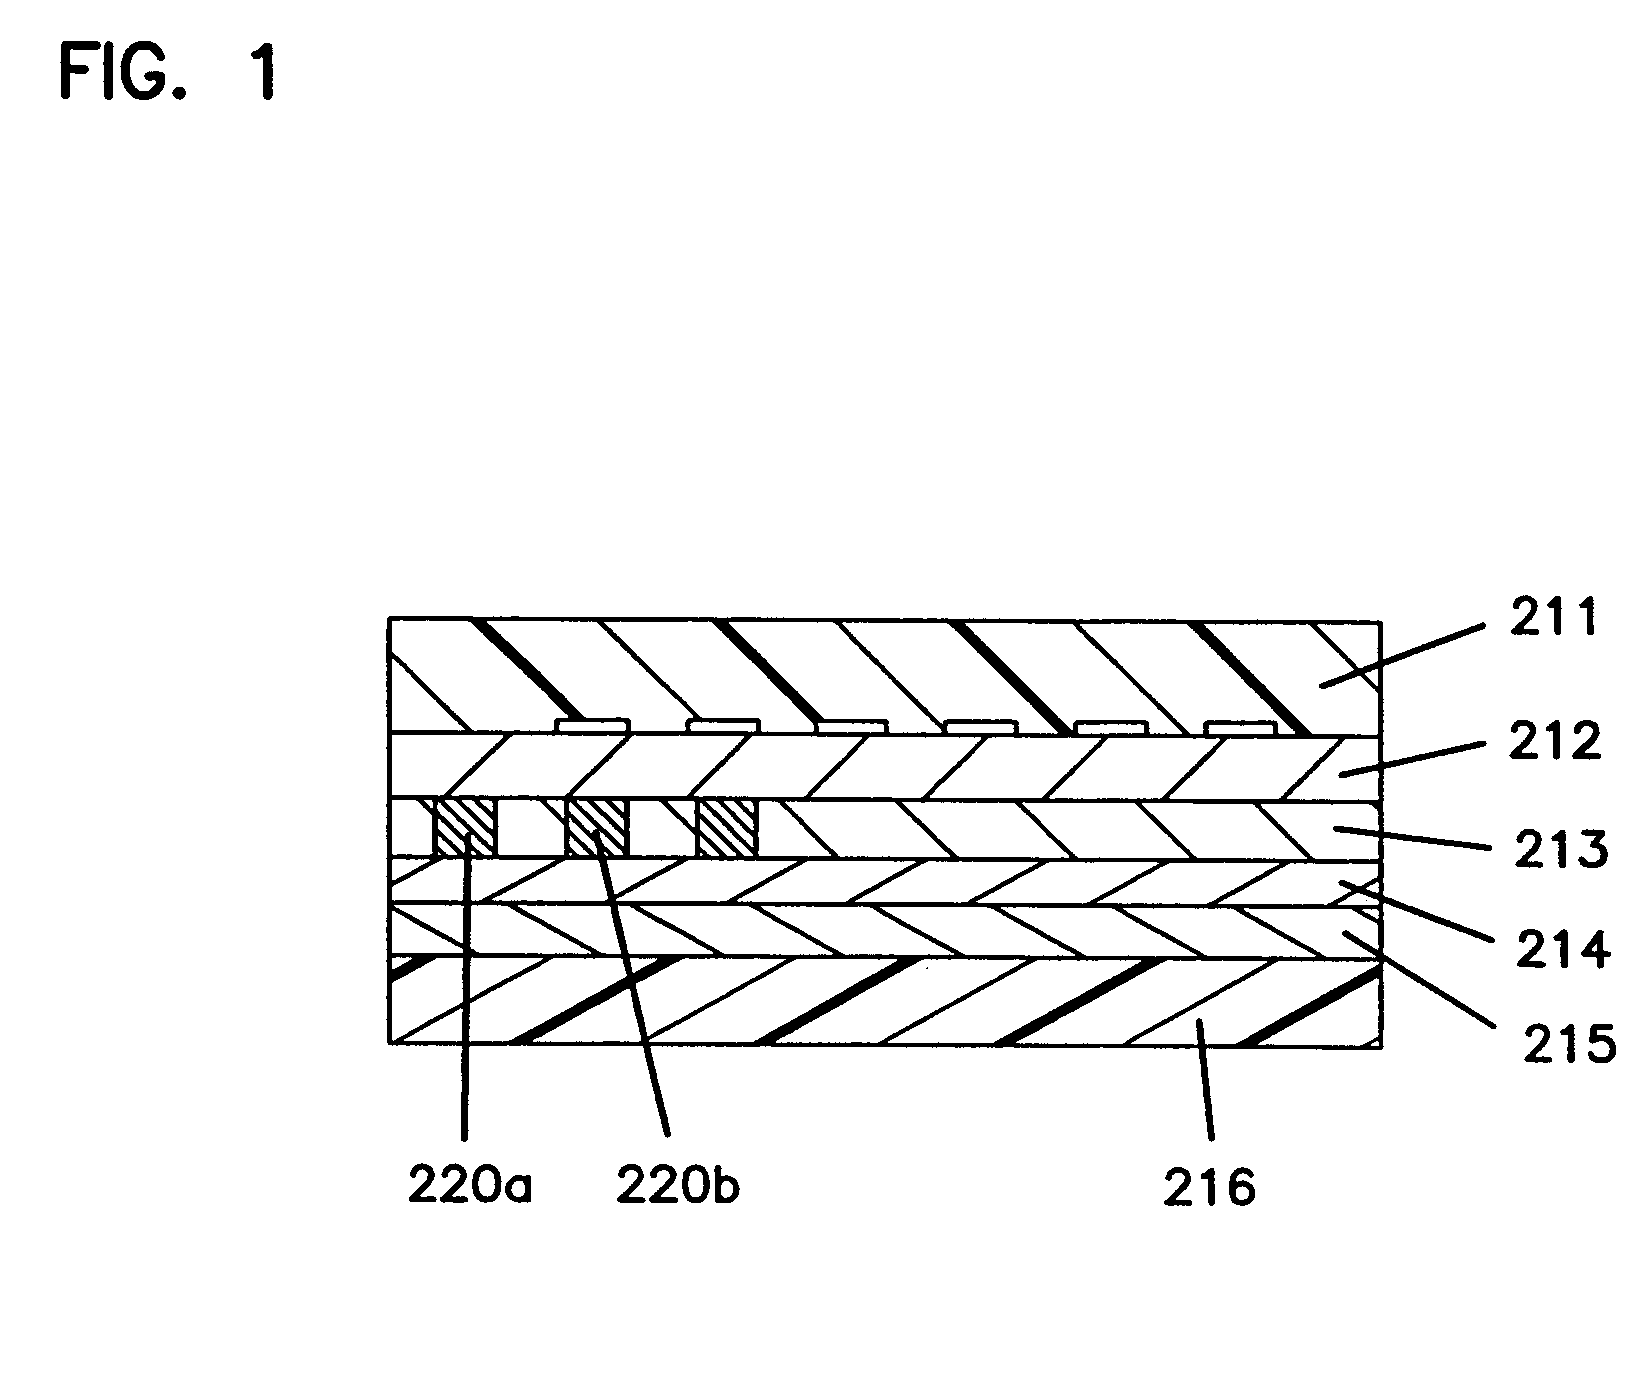 Optical disk, method for recording and reproducing write-once information on and from optical disk, optical disk reproducing device, optical disk recording and reproducing device, device for recording write-once information on optical disk, and optical disk recording device